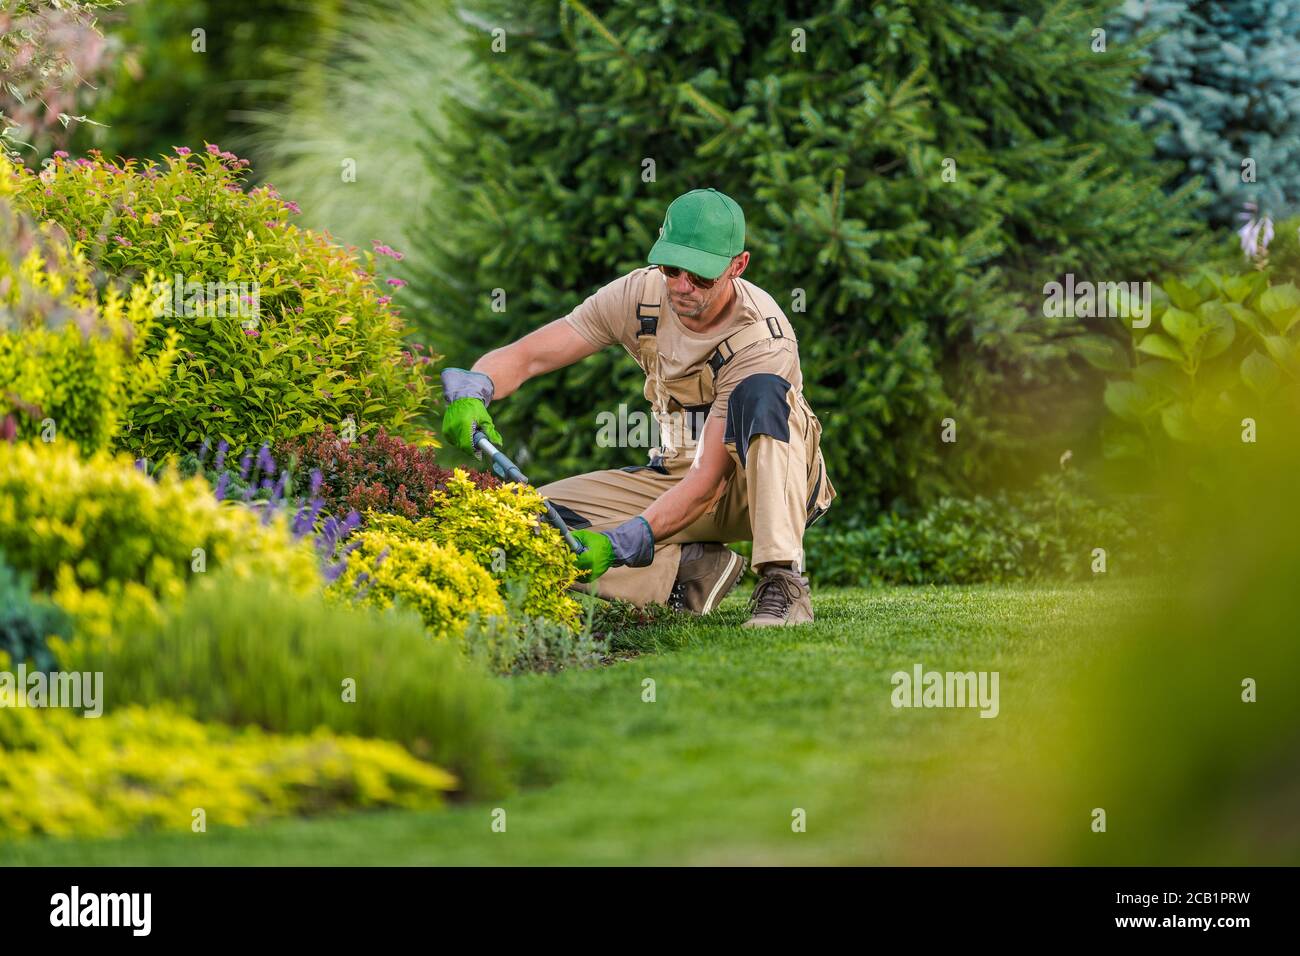 Middle Age Male Gardener At Work Pruning Colorful Flowering Bushes With Trimming Shears. Stock Photo